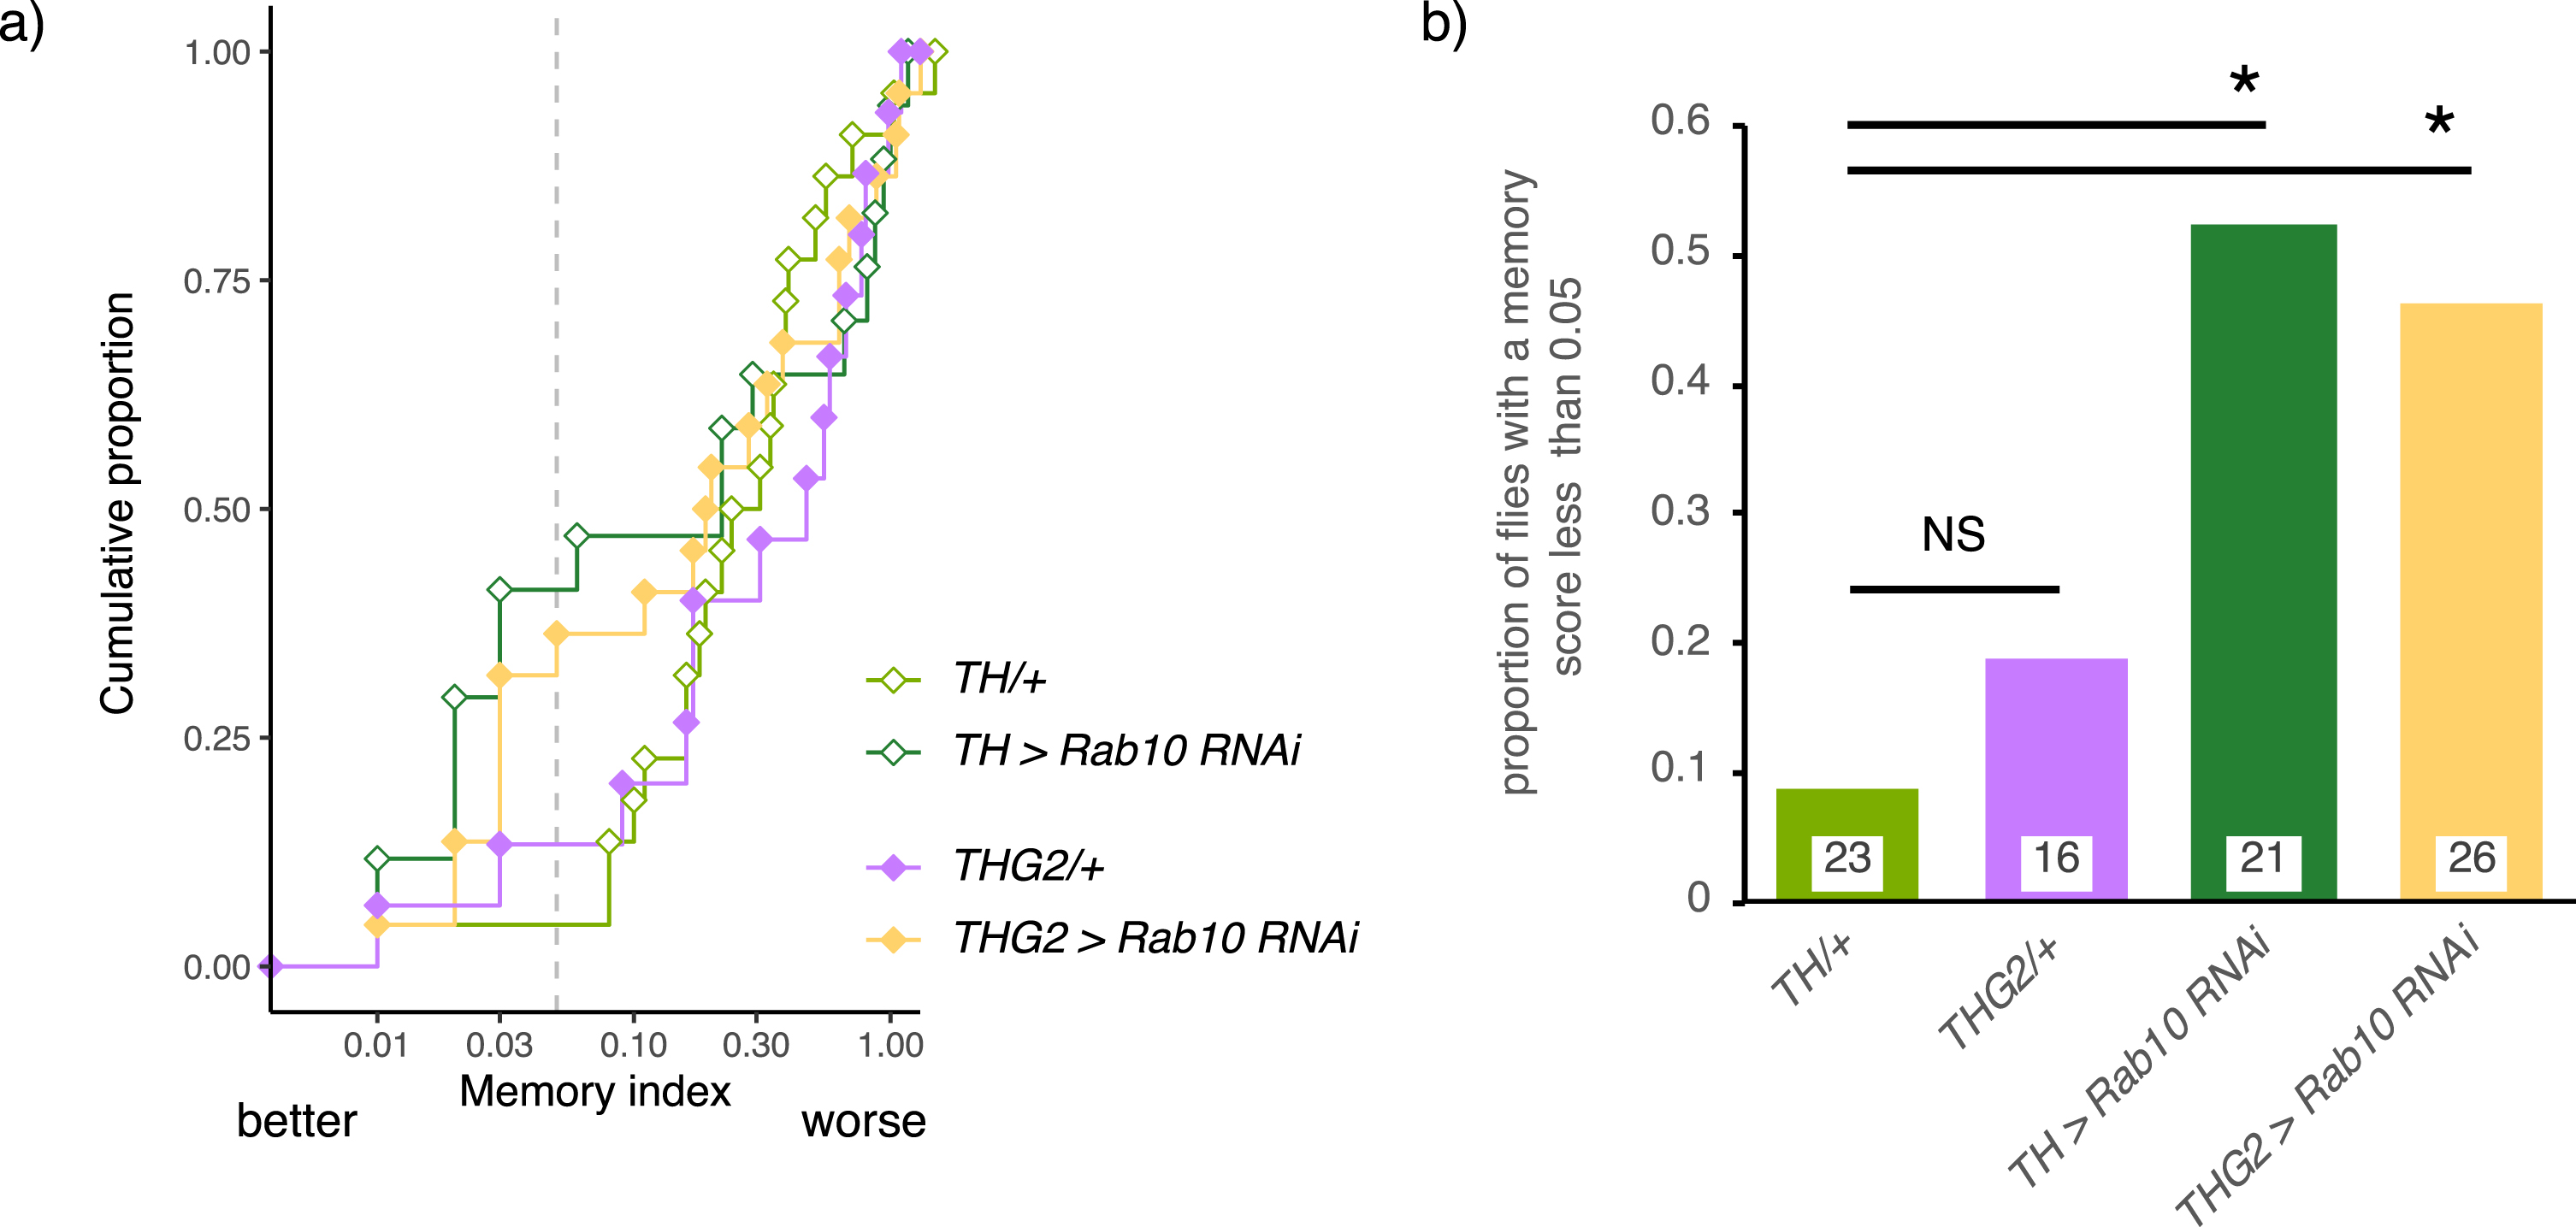 Memory depends on dopaminergic Rab10 but not LRRK2-G2019S. A) Depletion of Rab10 in the control background (TH > Rab10RNAi) increases the proportion of flies with low memory index (MI) compared to flies with no transgene expression (TH/+). Expression of LRRK2-G2019S has no effect on performance; either for the THG2/+v TH/+control flies, nor for the flies with Rab10RNAi. a) Raw scores, b) summary data. Exact genotypes and statistical results in Supplementary Table 6.